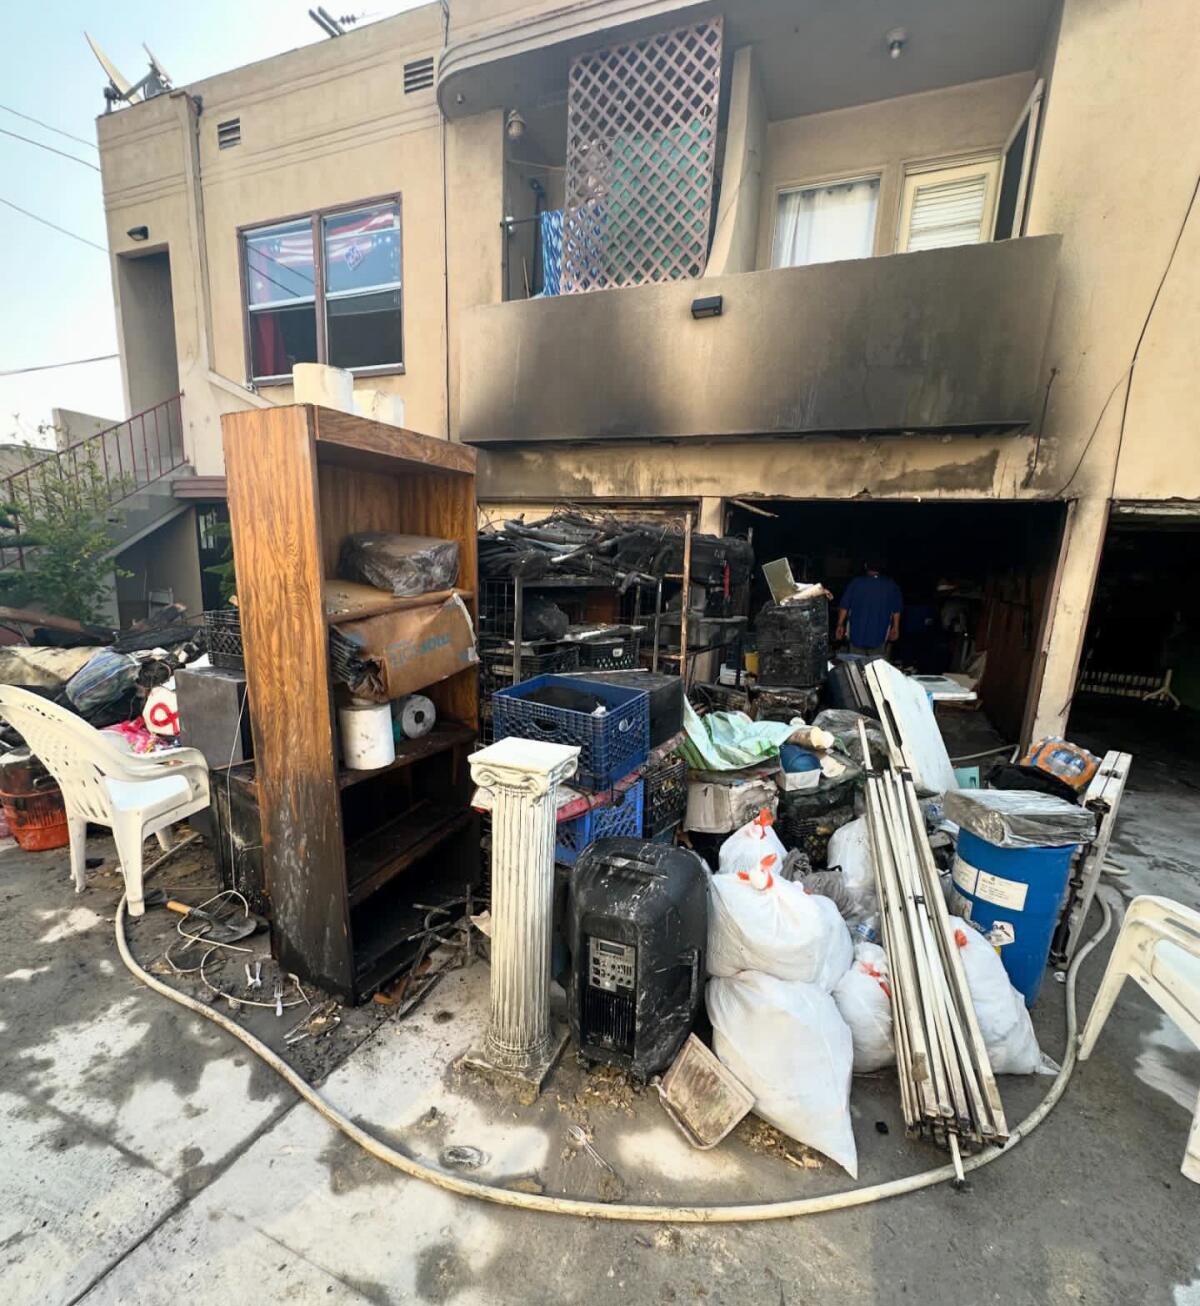 Household objects stand outside a burned building with apartments over garages.